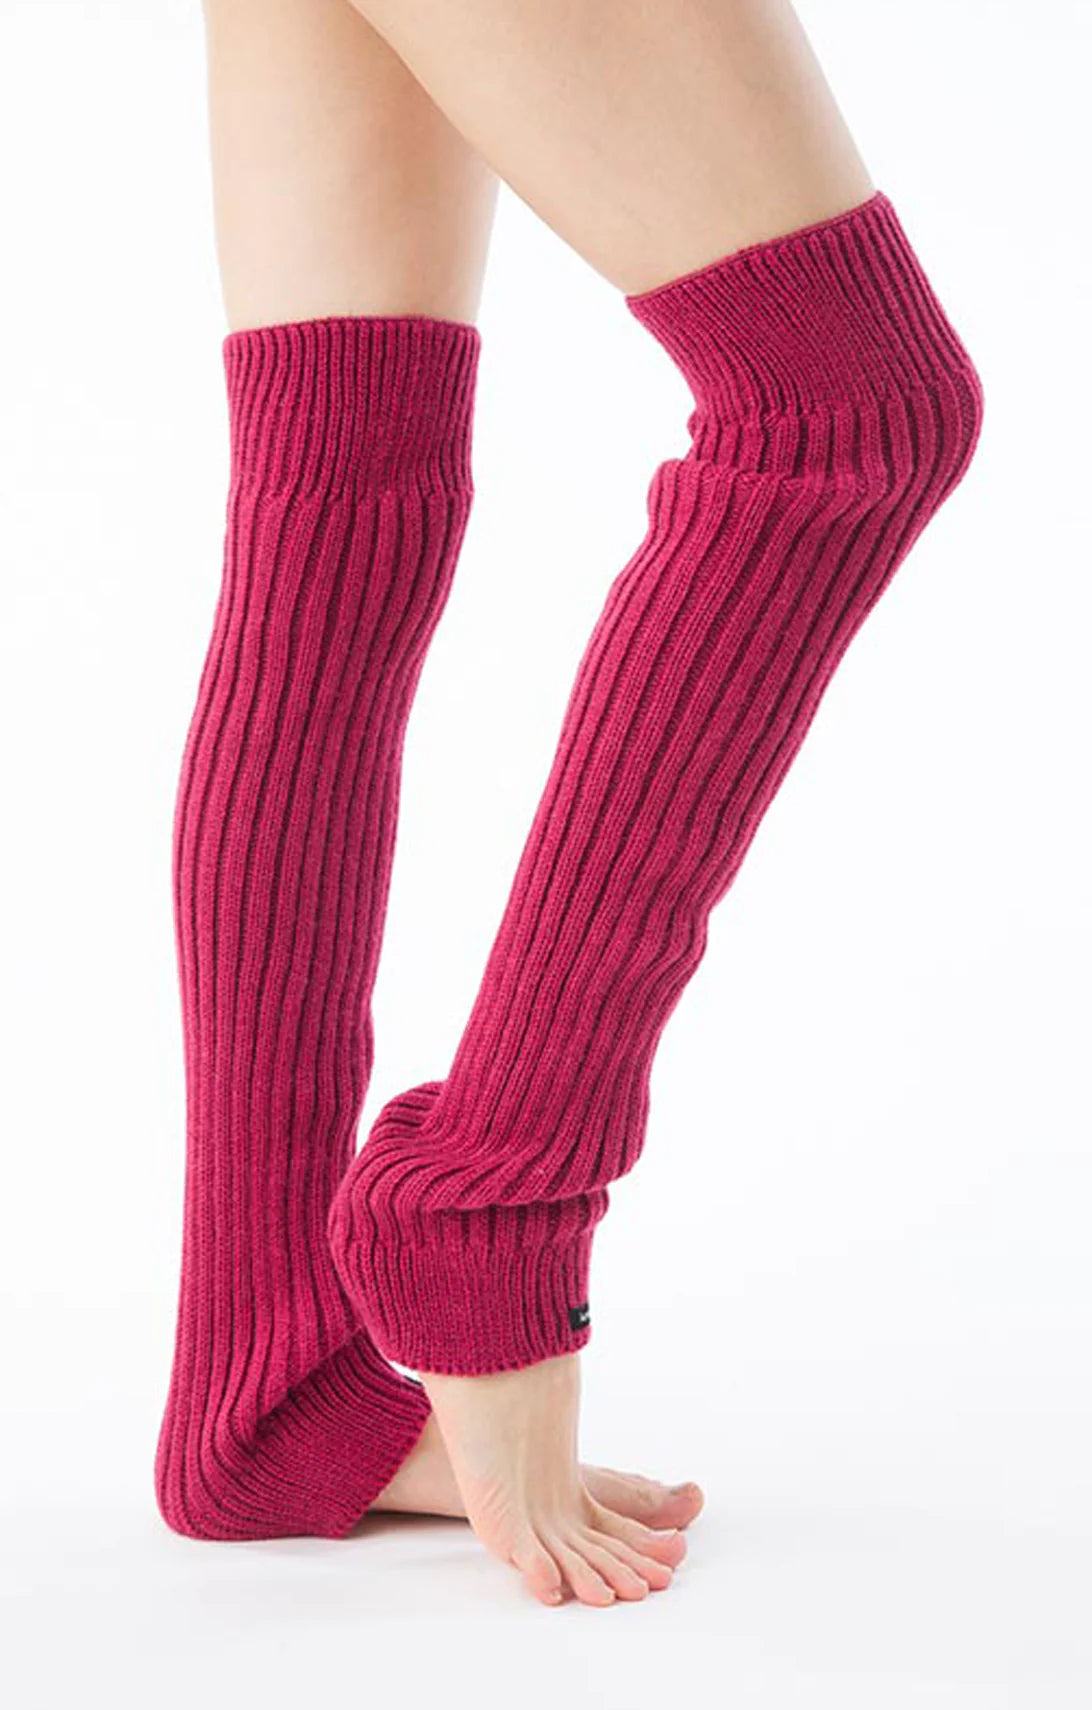 Side view of a woman's leg wearing the Fuchsia Pink color of the Knitido plus brand Wool Blend Ribbed Leg Warmer product